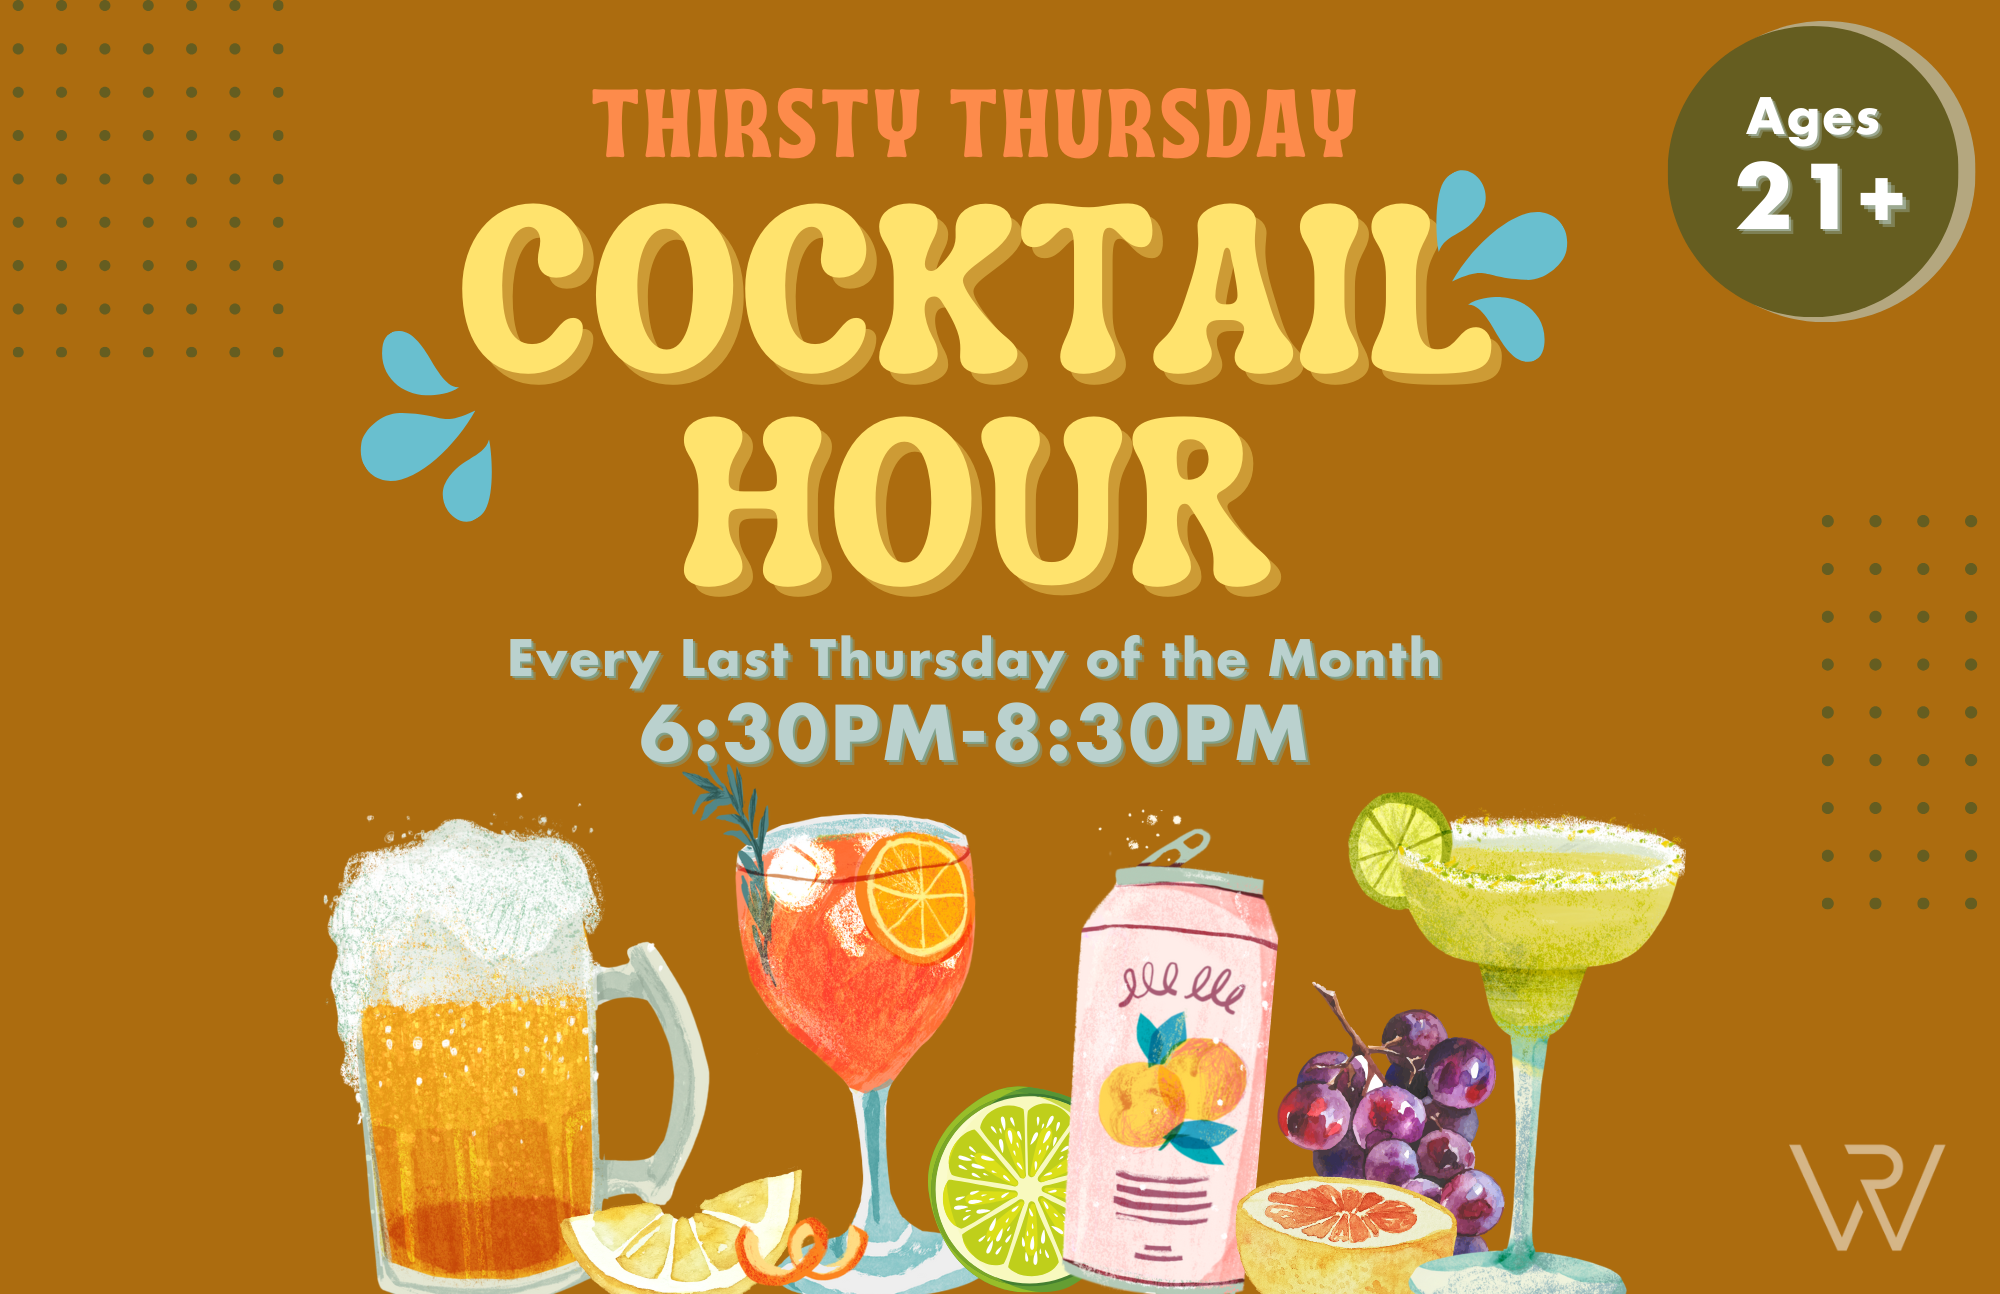 Thirsty Thursday Cocktail Hour Welcome Sign.png